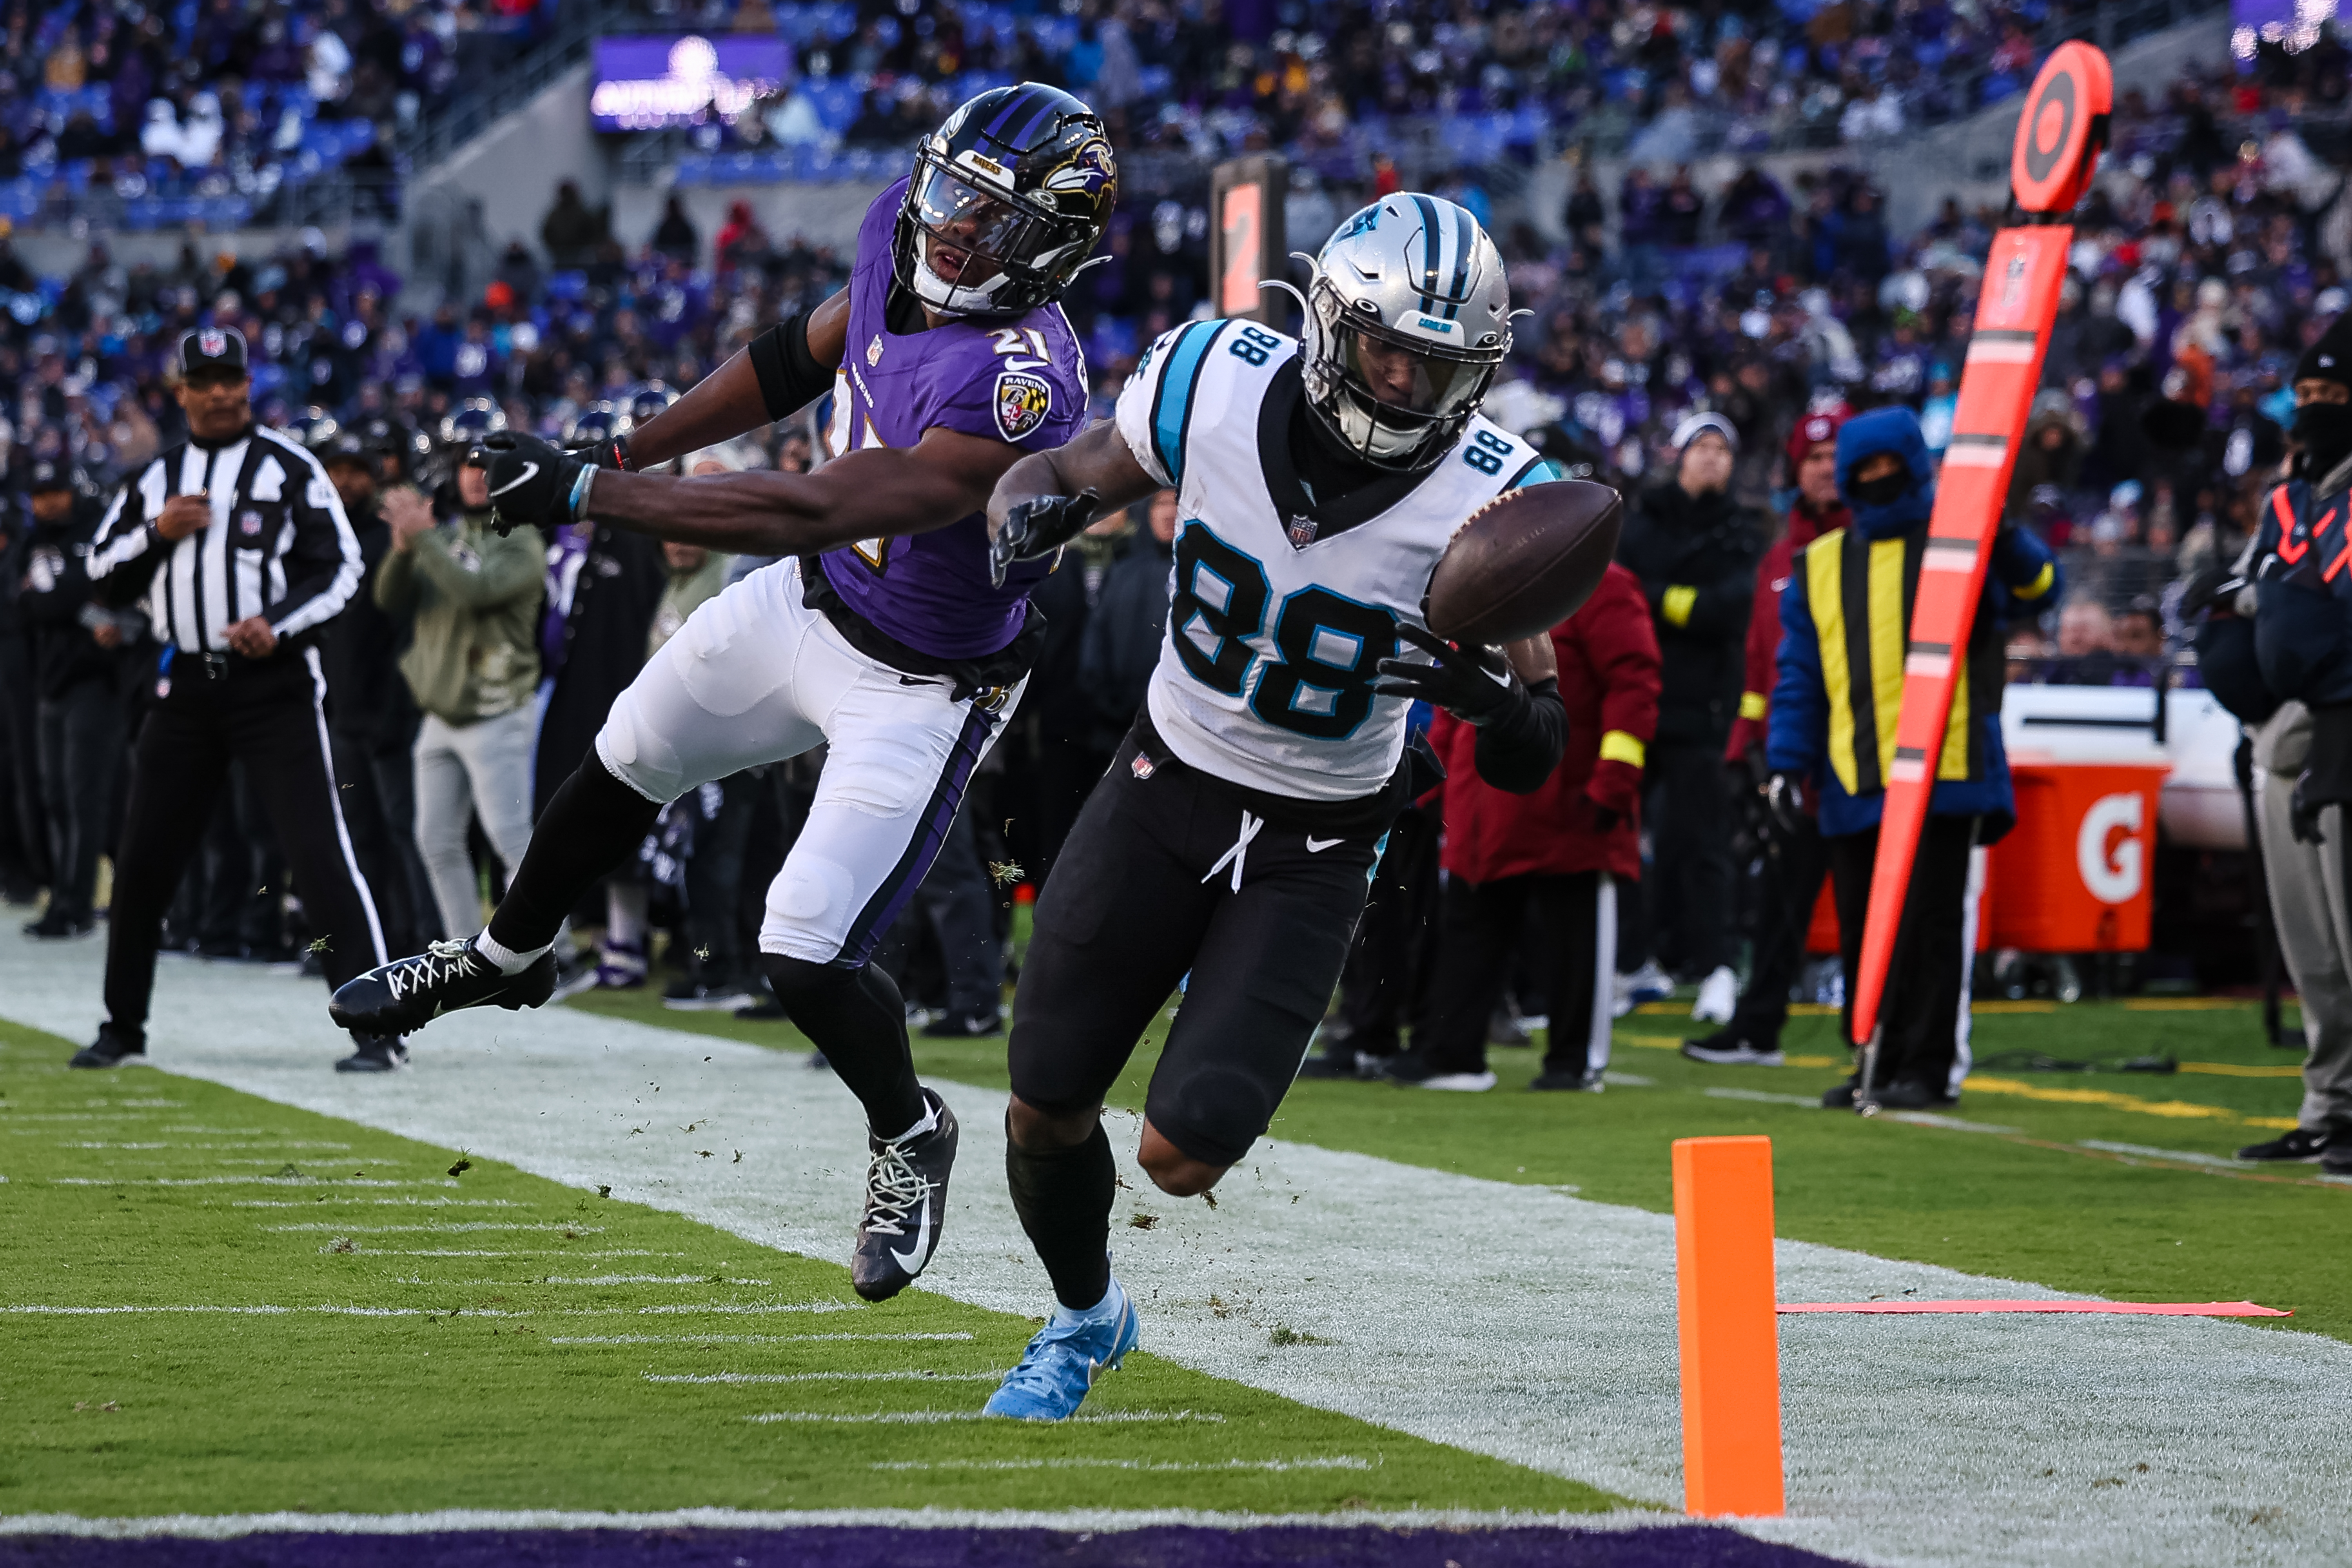 Brandon Stephens #21 of the Baltimore Ravens defends a pass intended for Terrace Marshall Jr. #88 of the Carolina Panthers during the second half at M&amp;T Bank Stadium on November 20, 2022 in Baltimore, Maryland.